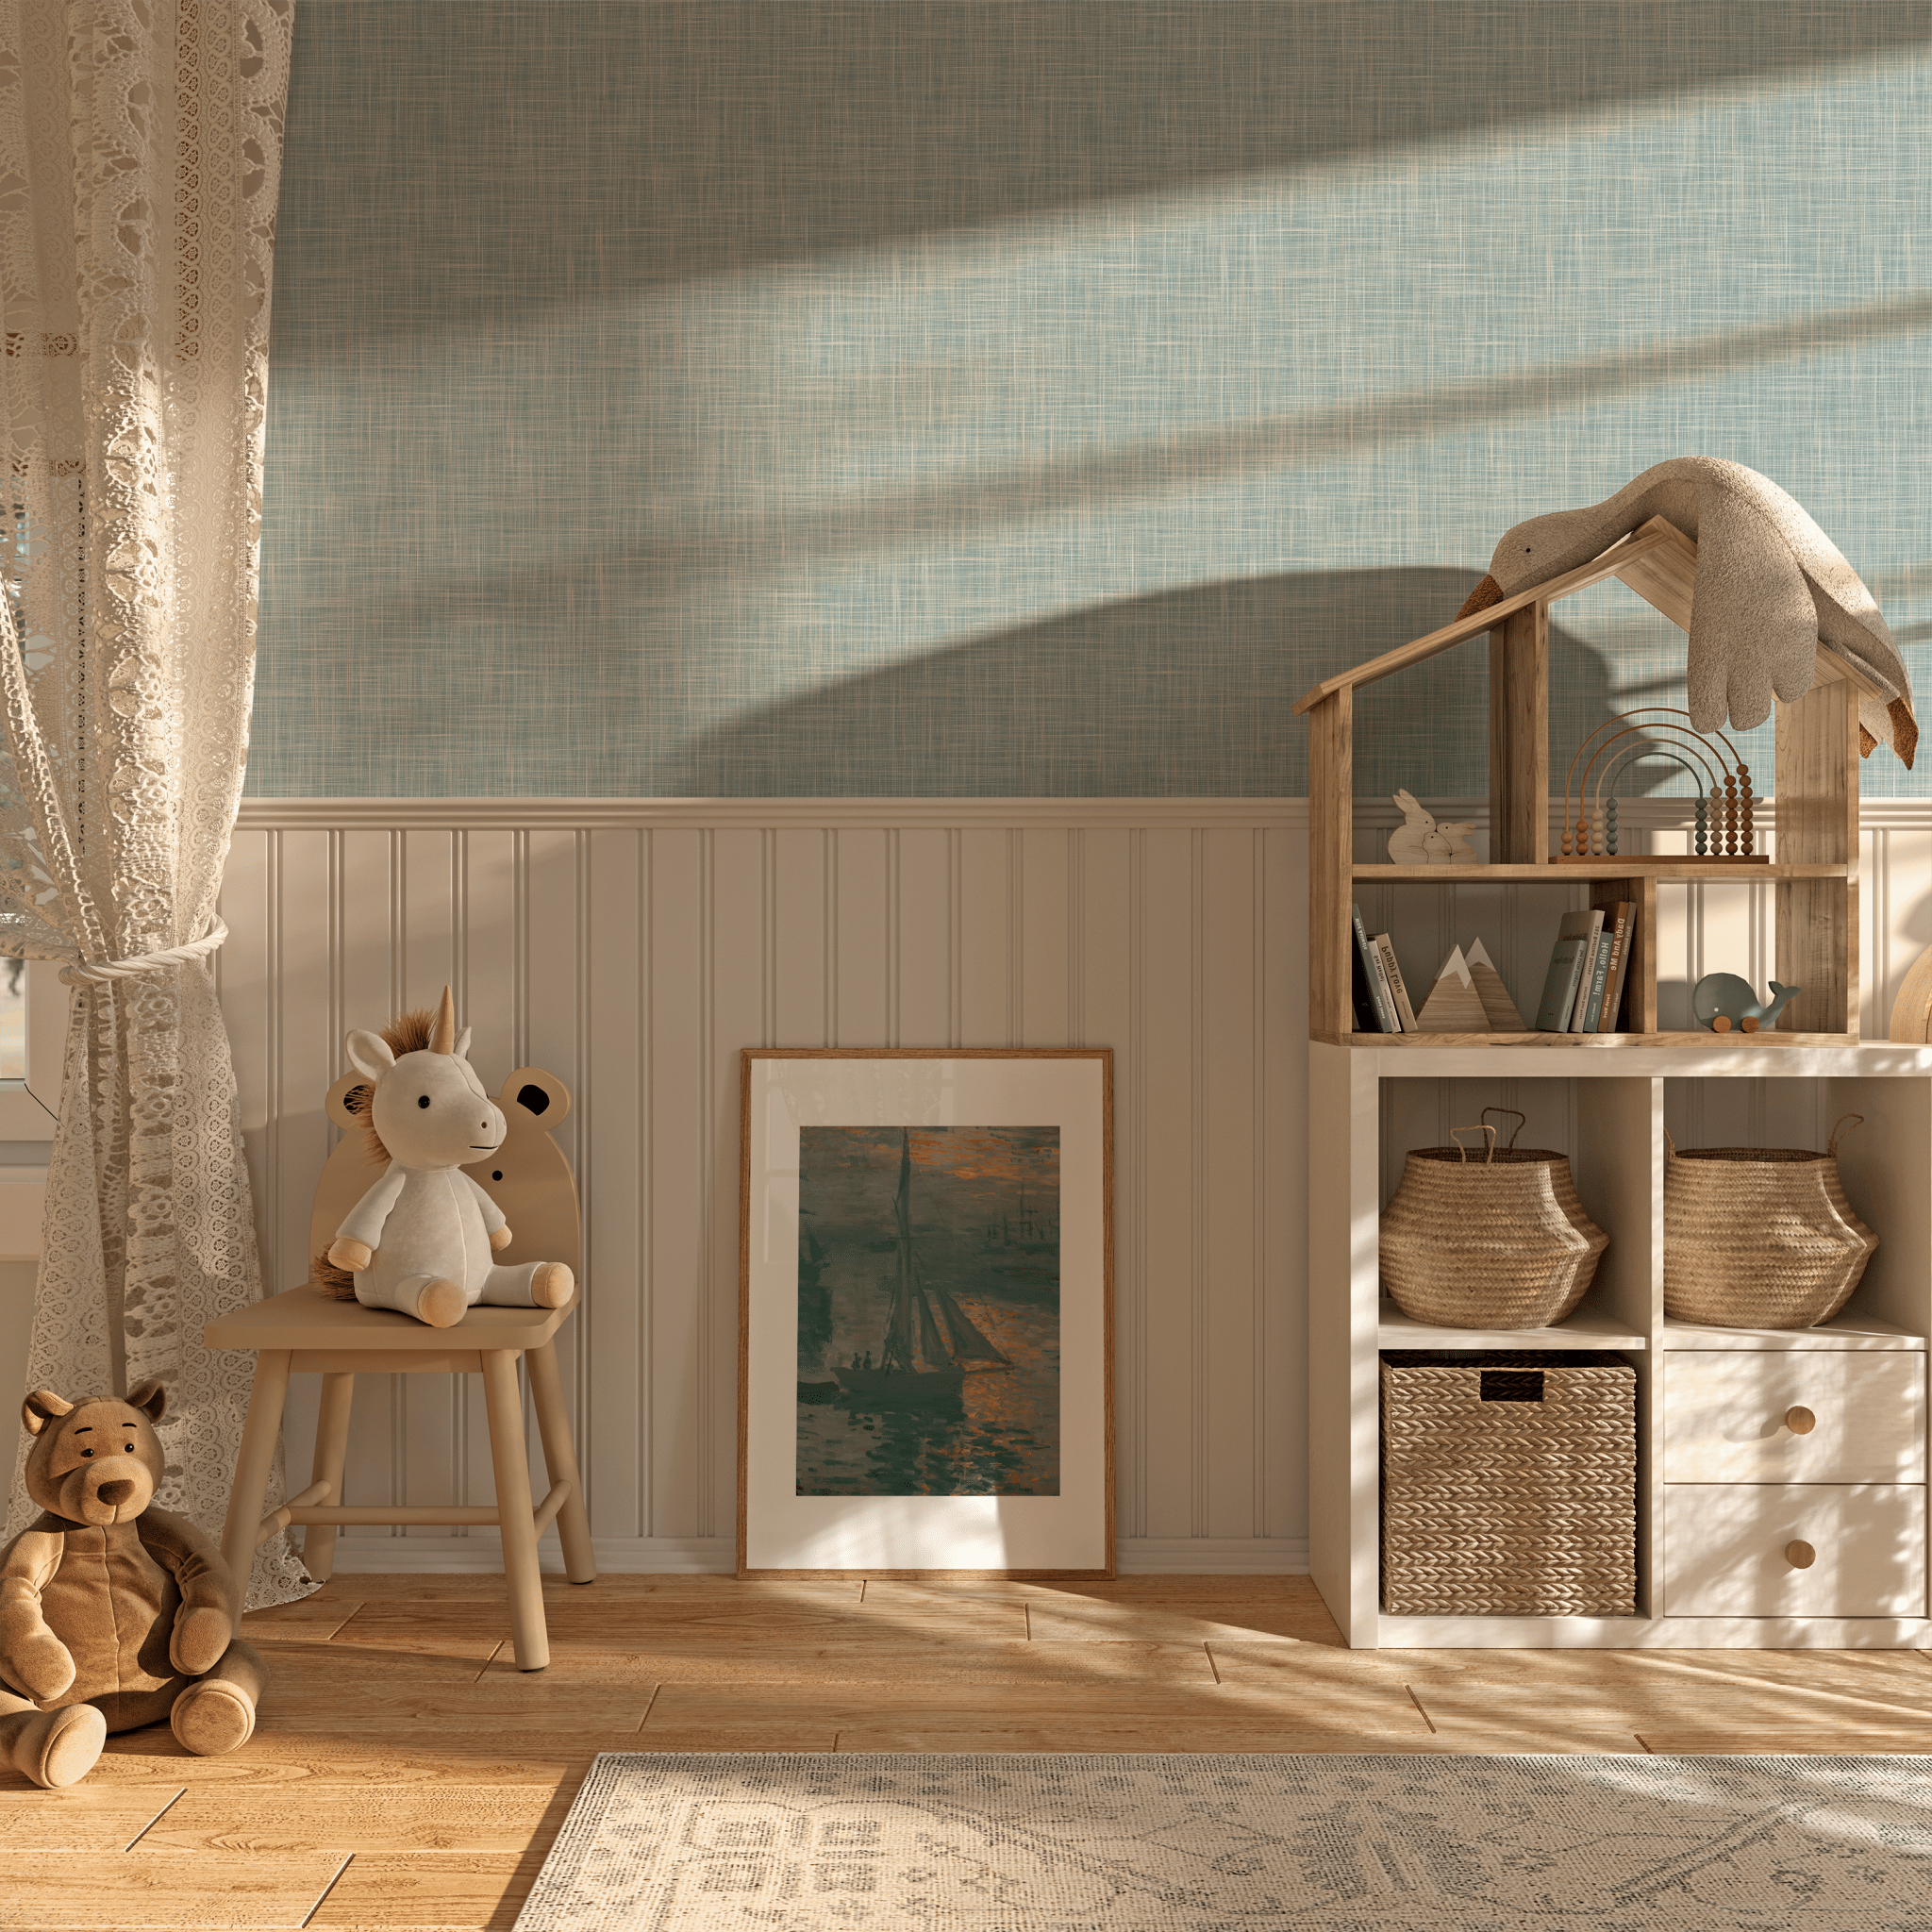 Sky blue faux grasscloth wallpaper self adhesive and removable, peel and stick grasscloth wallpaper.